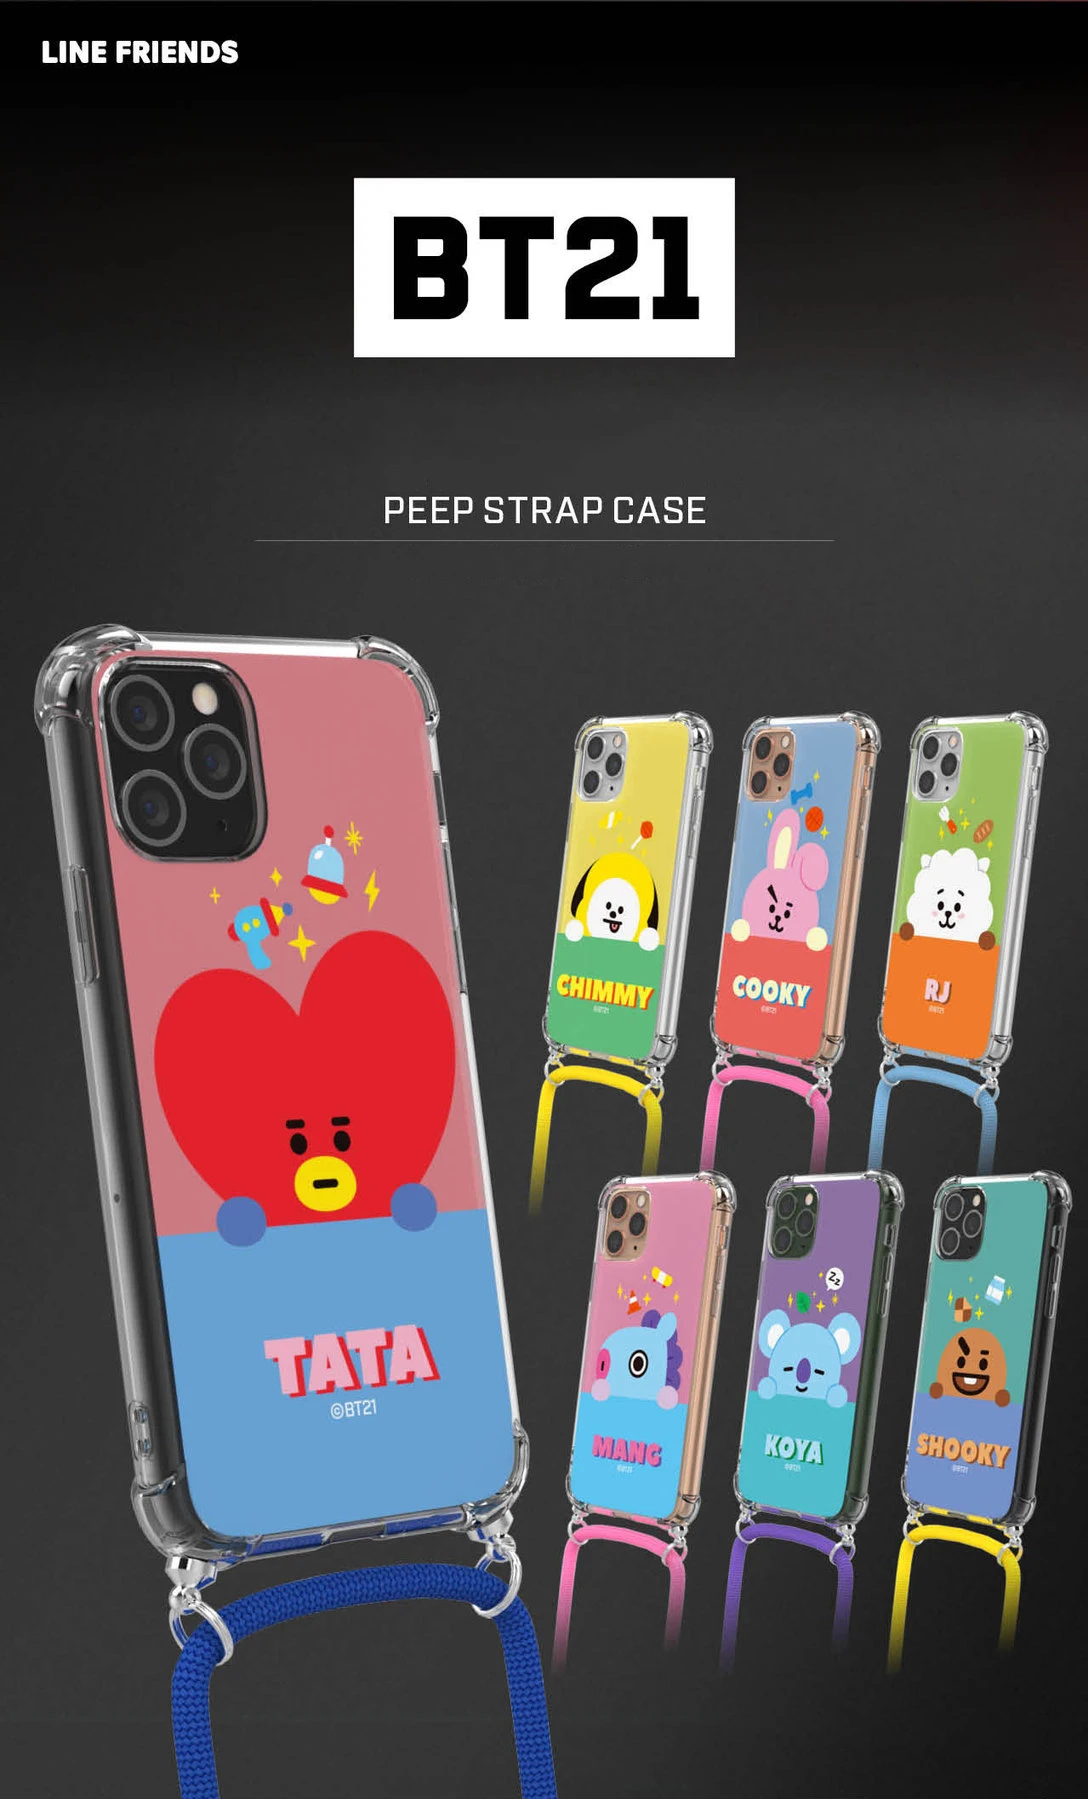 Mobile Cover Phone Case Tpu Phone Case For Bt21 Custom Design Buy Tpu Phone Case Custom Design Tpu Phone Case Mobile Cover Phone Case Product On Alibaba Com